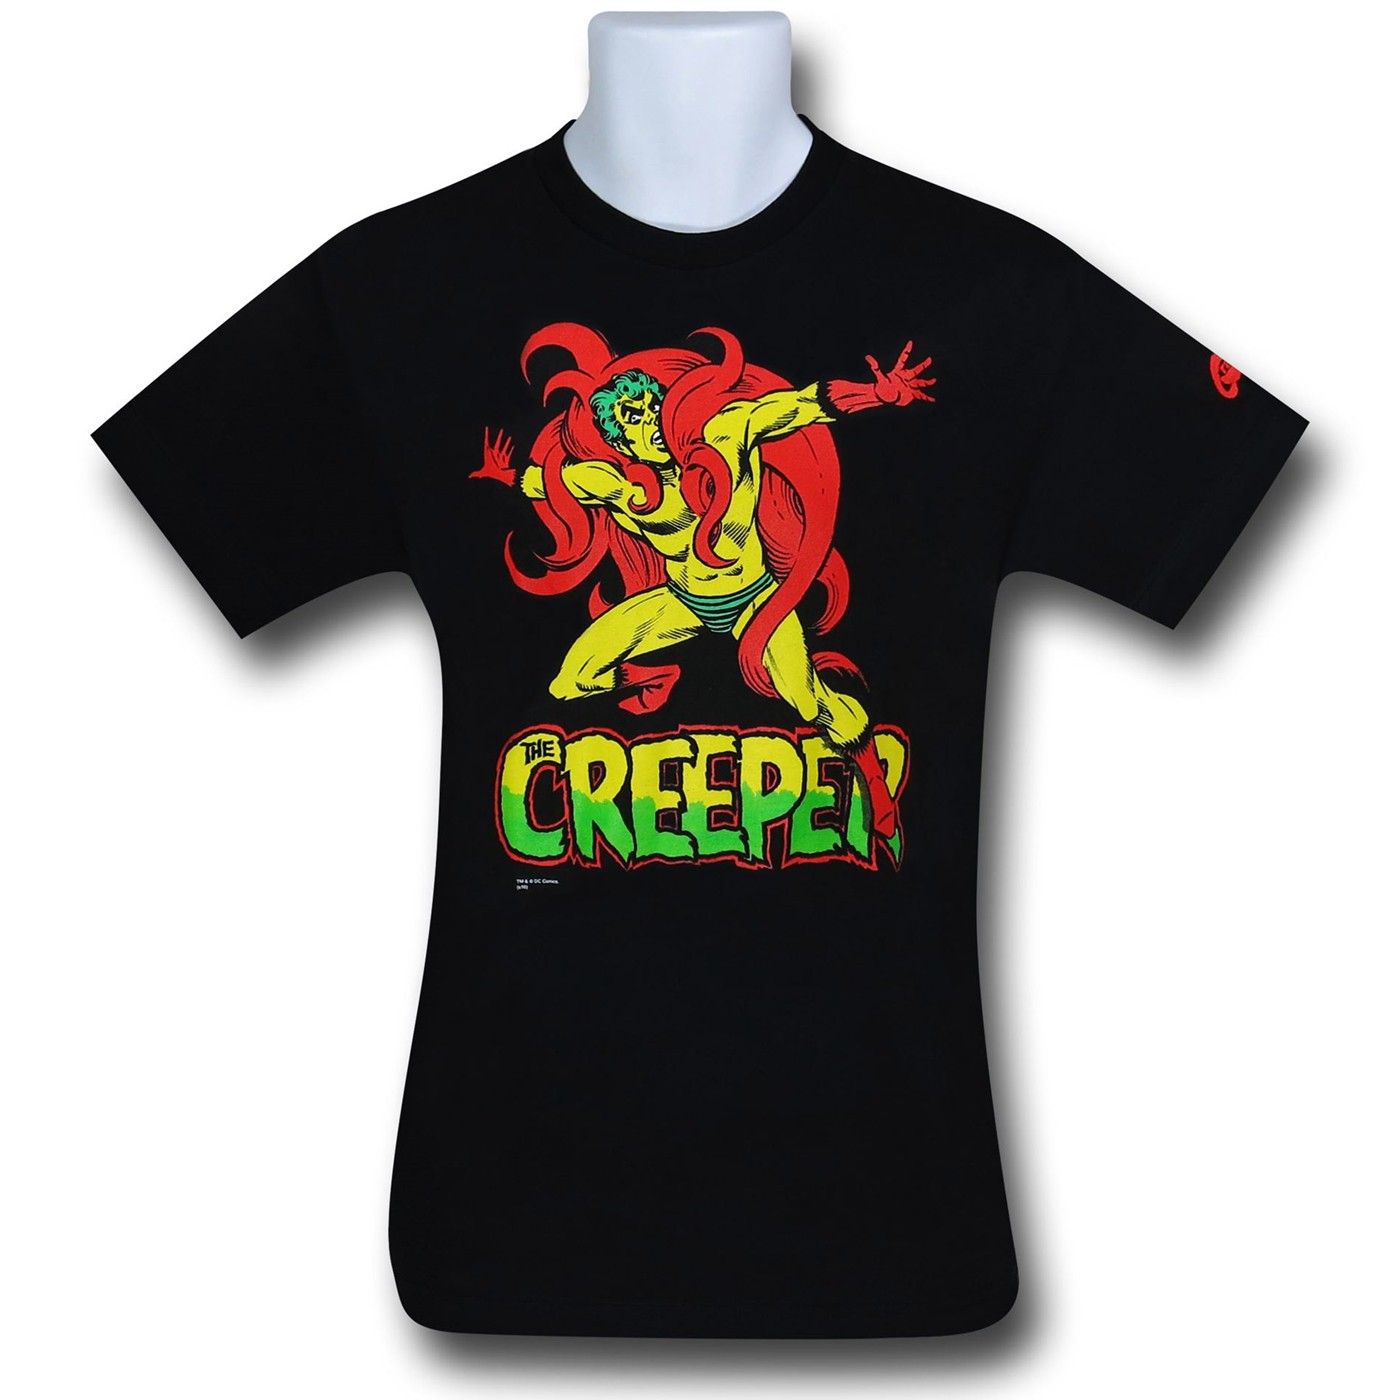 The Creeper by Steve Ditko T-Shirt